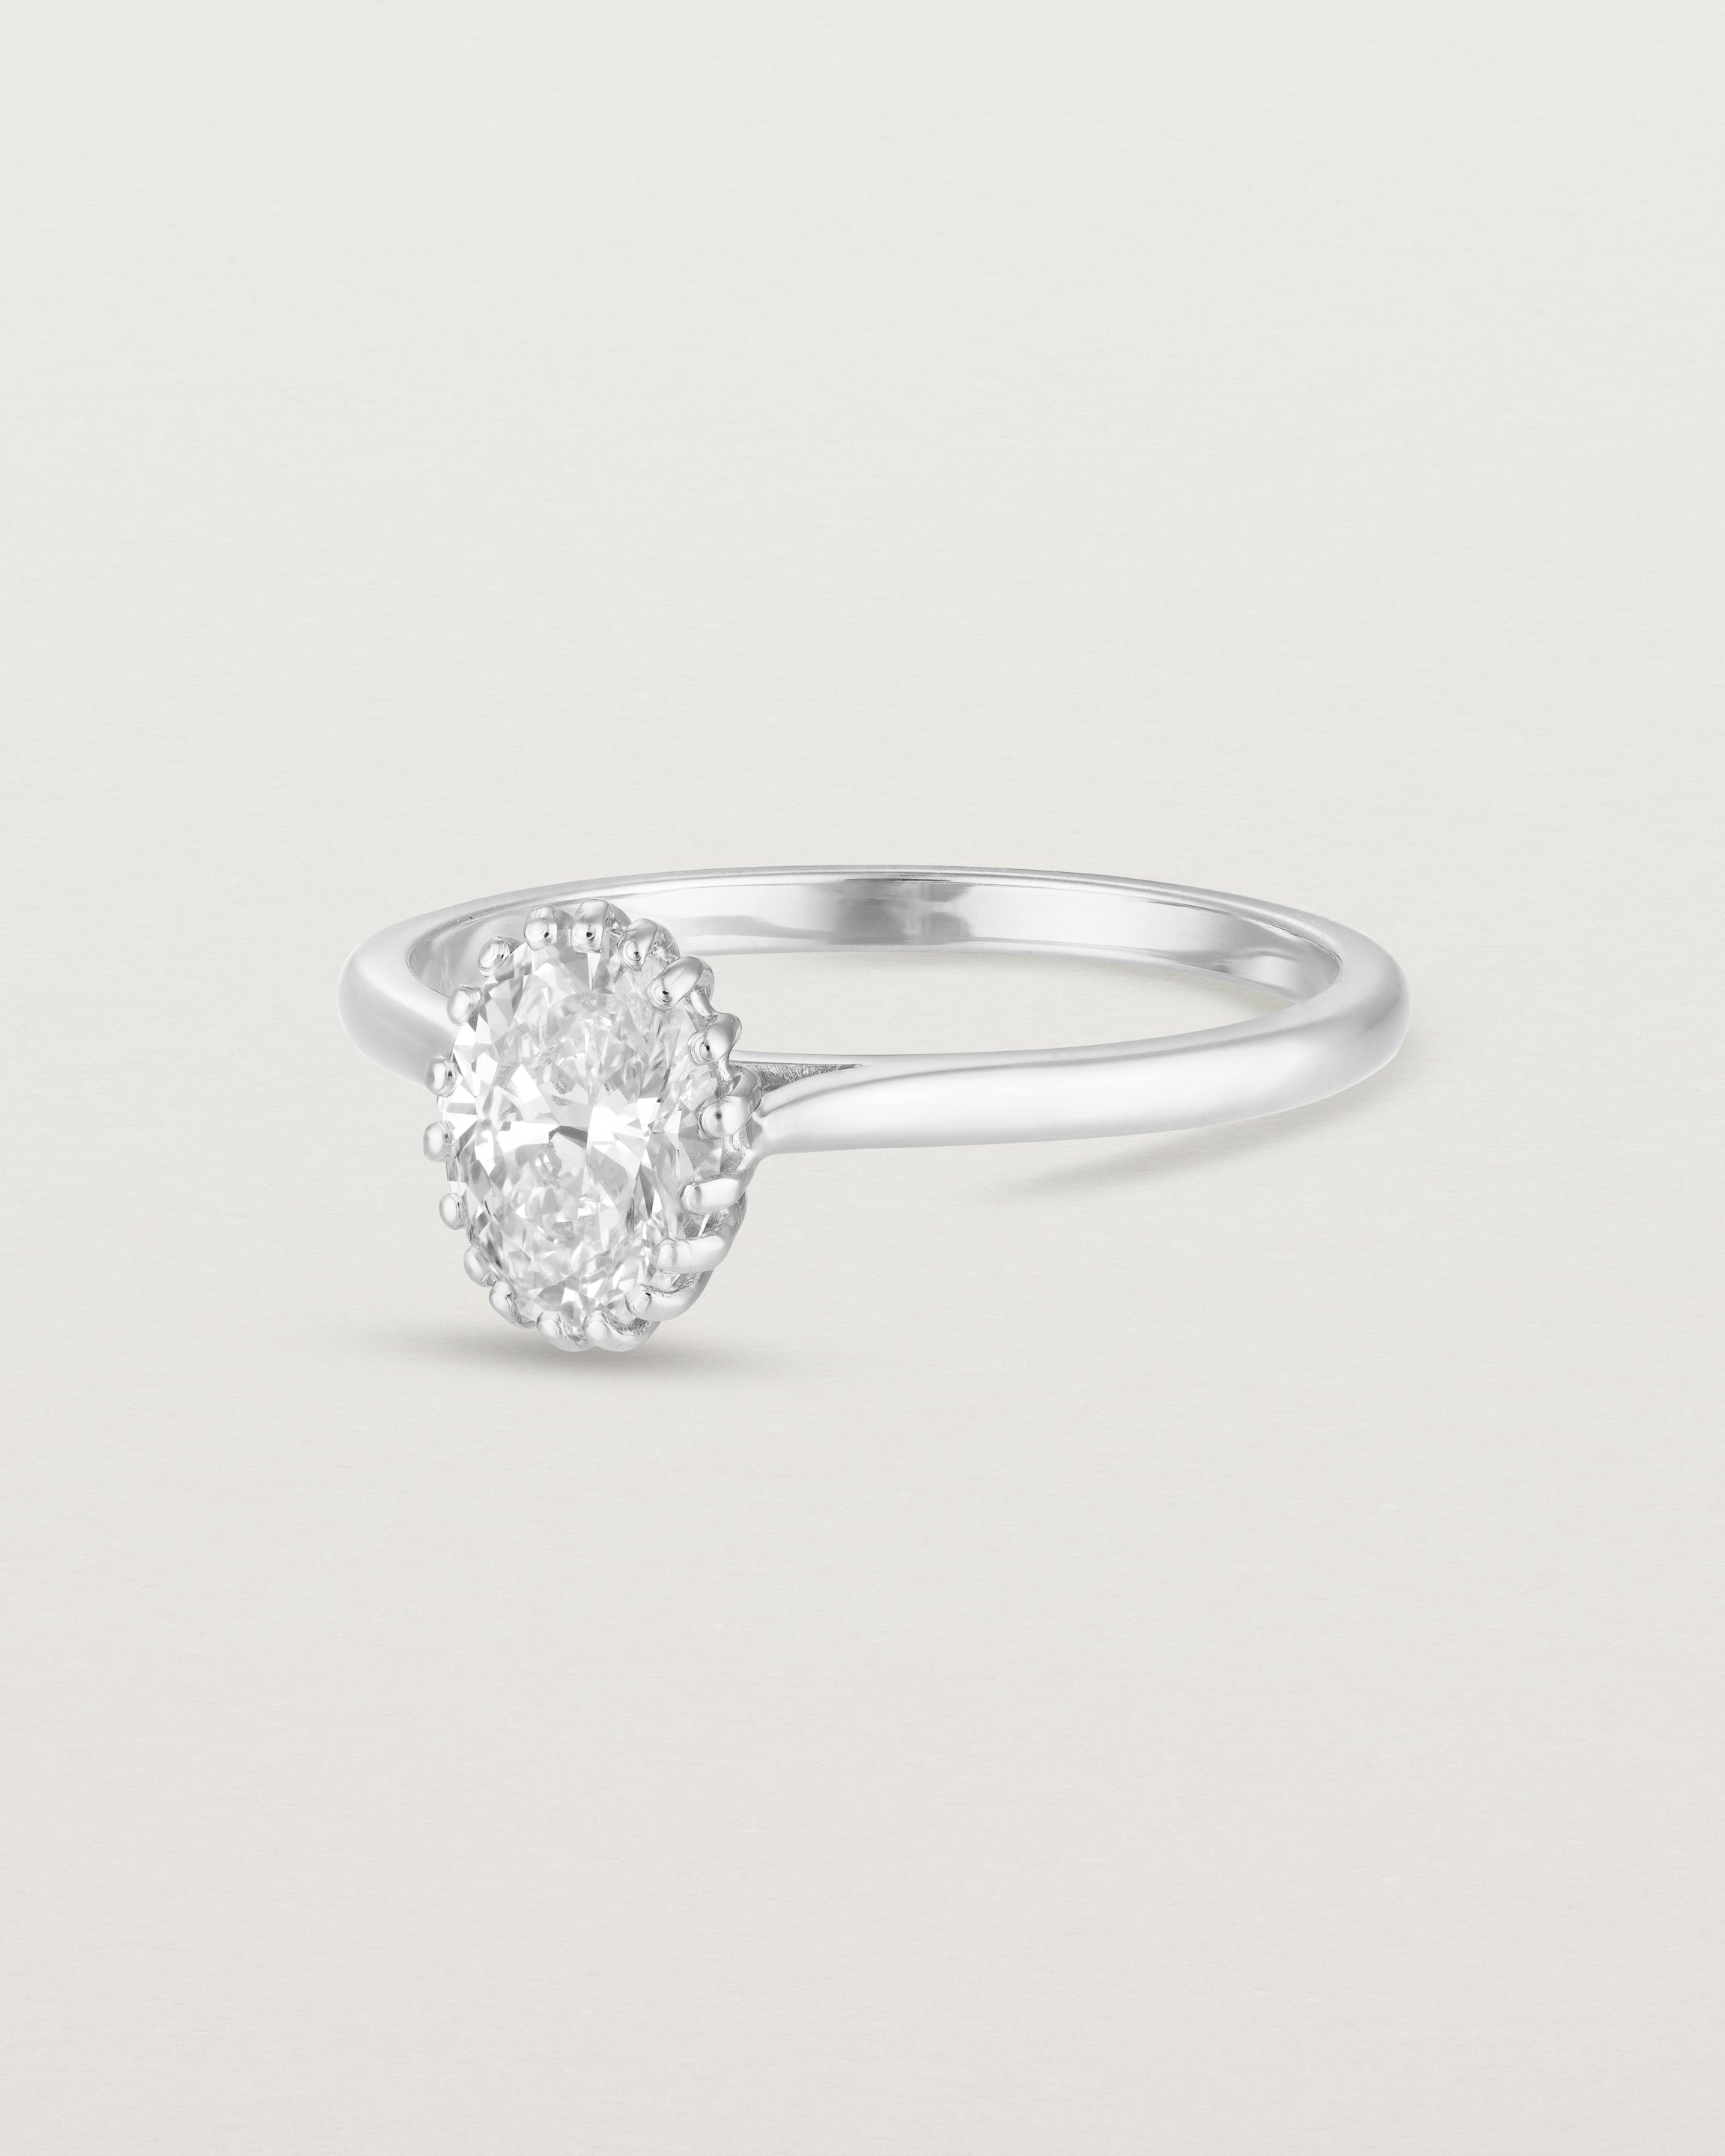 Angled view of the Meroë Oval Solitaire | Laboratory Grown Diamond in white gold.